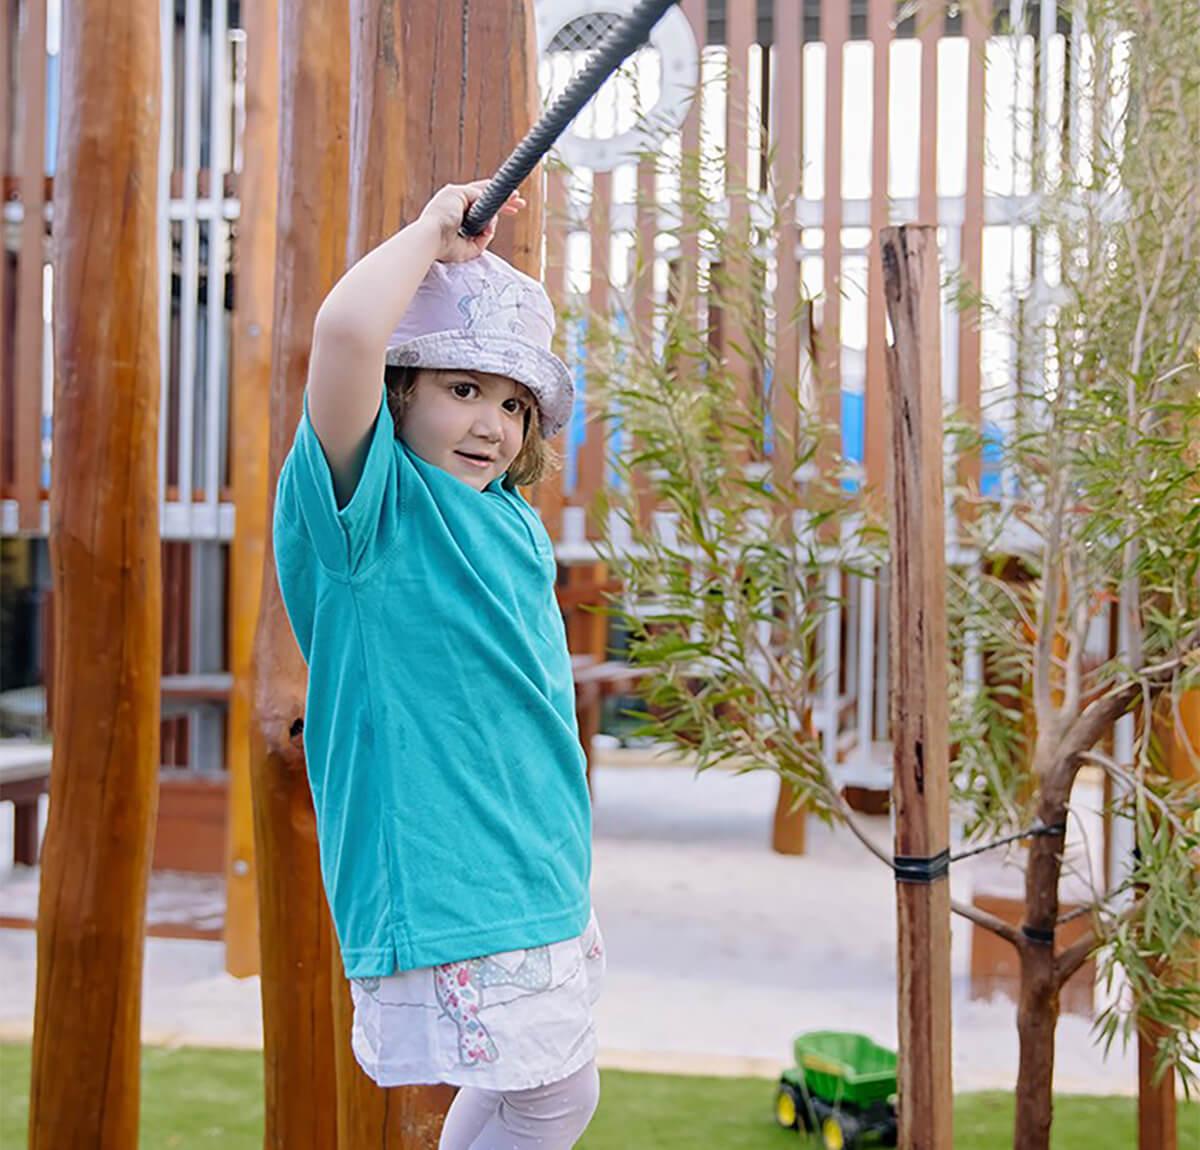 A girl child playing at nido child care garden area